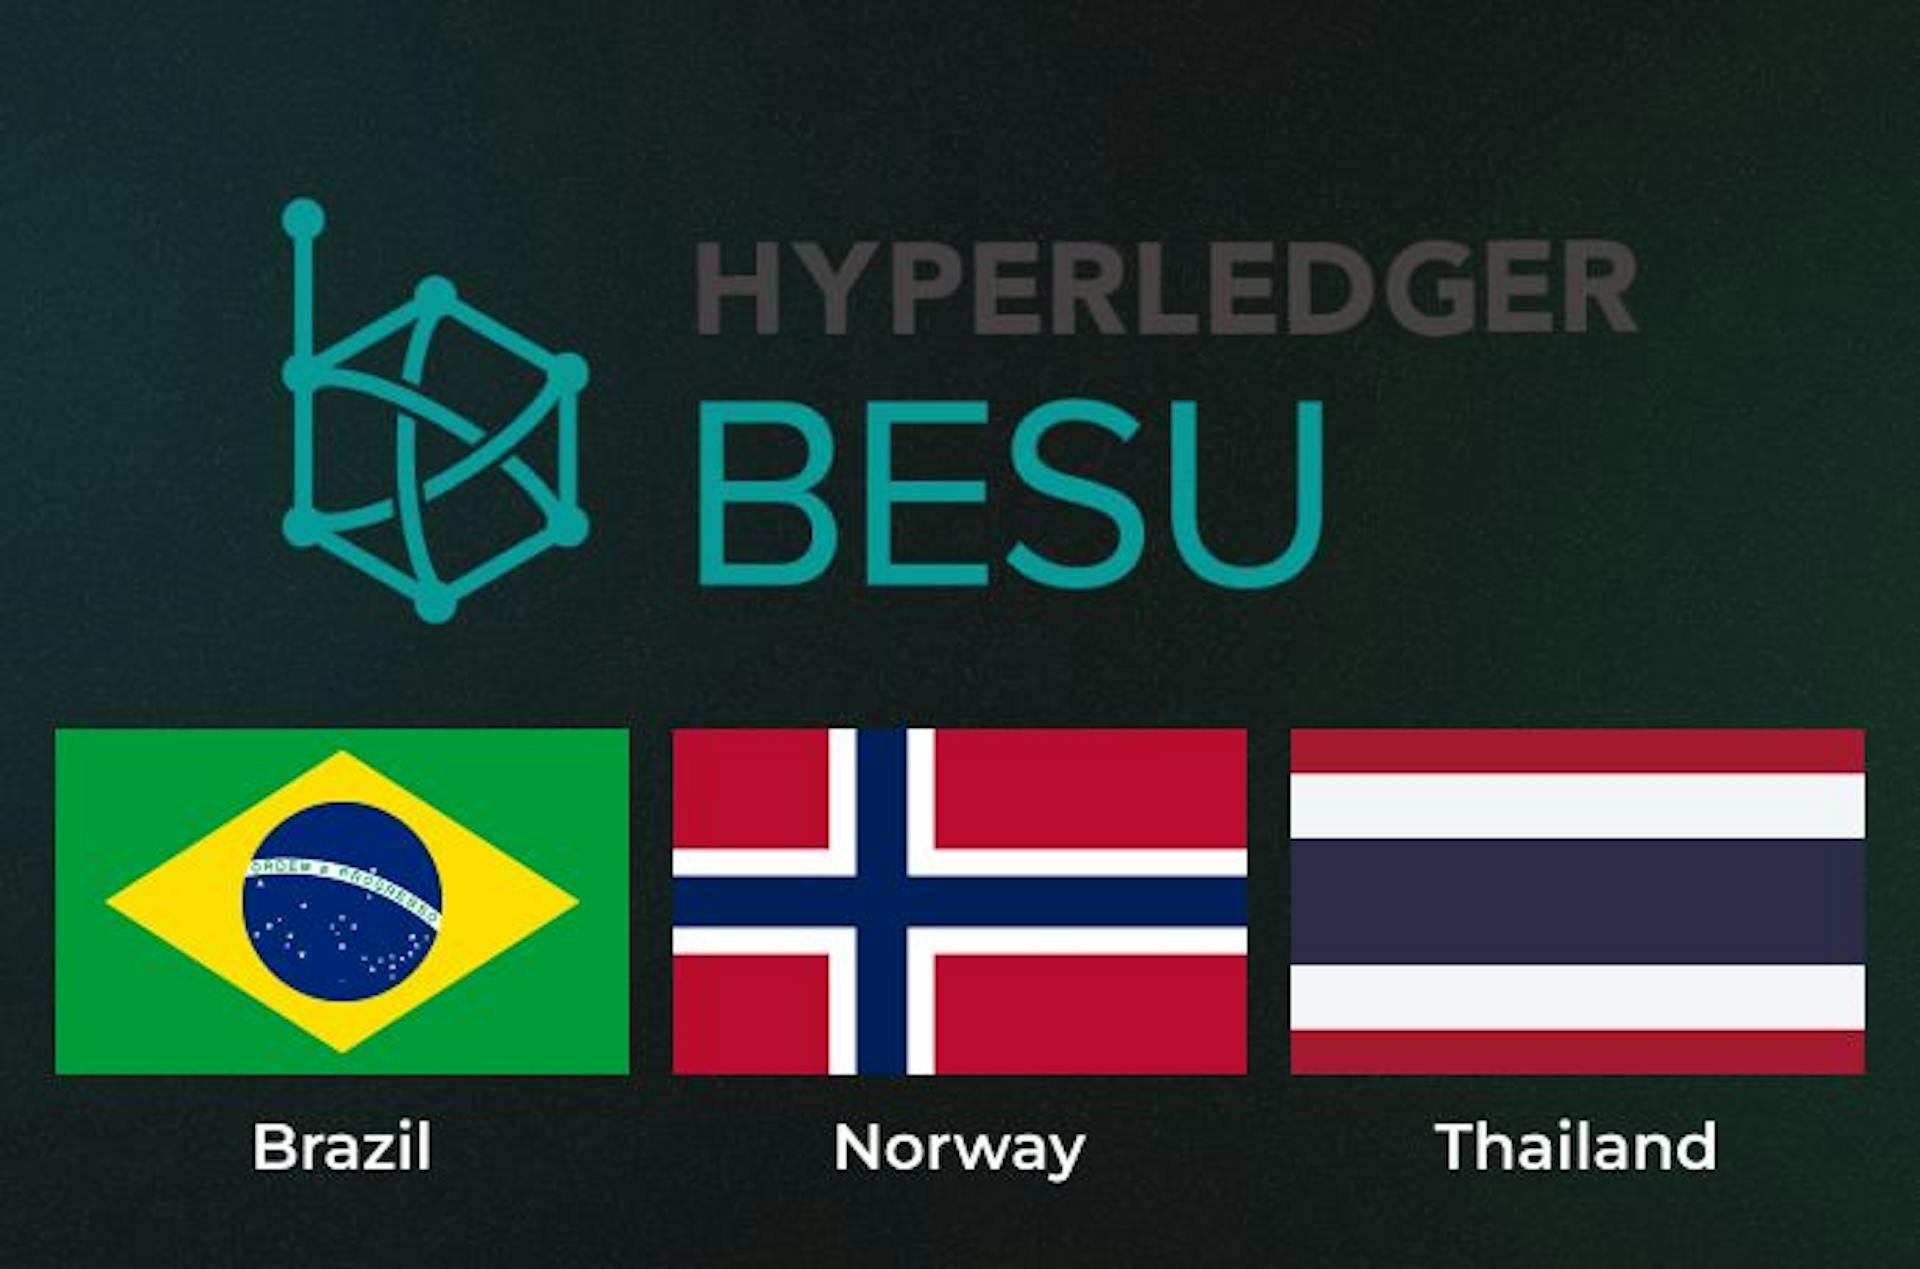 Some countries that use Hyperledger Besu to implement CBDC